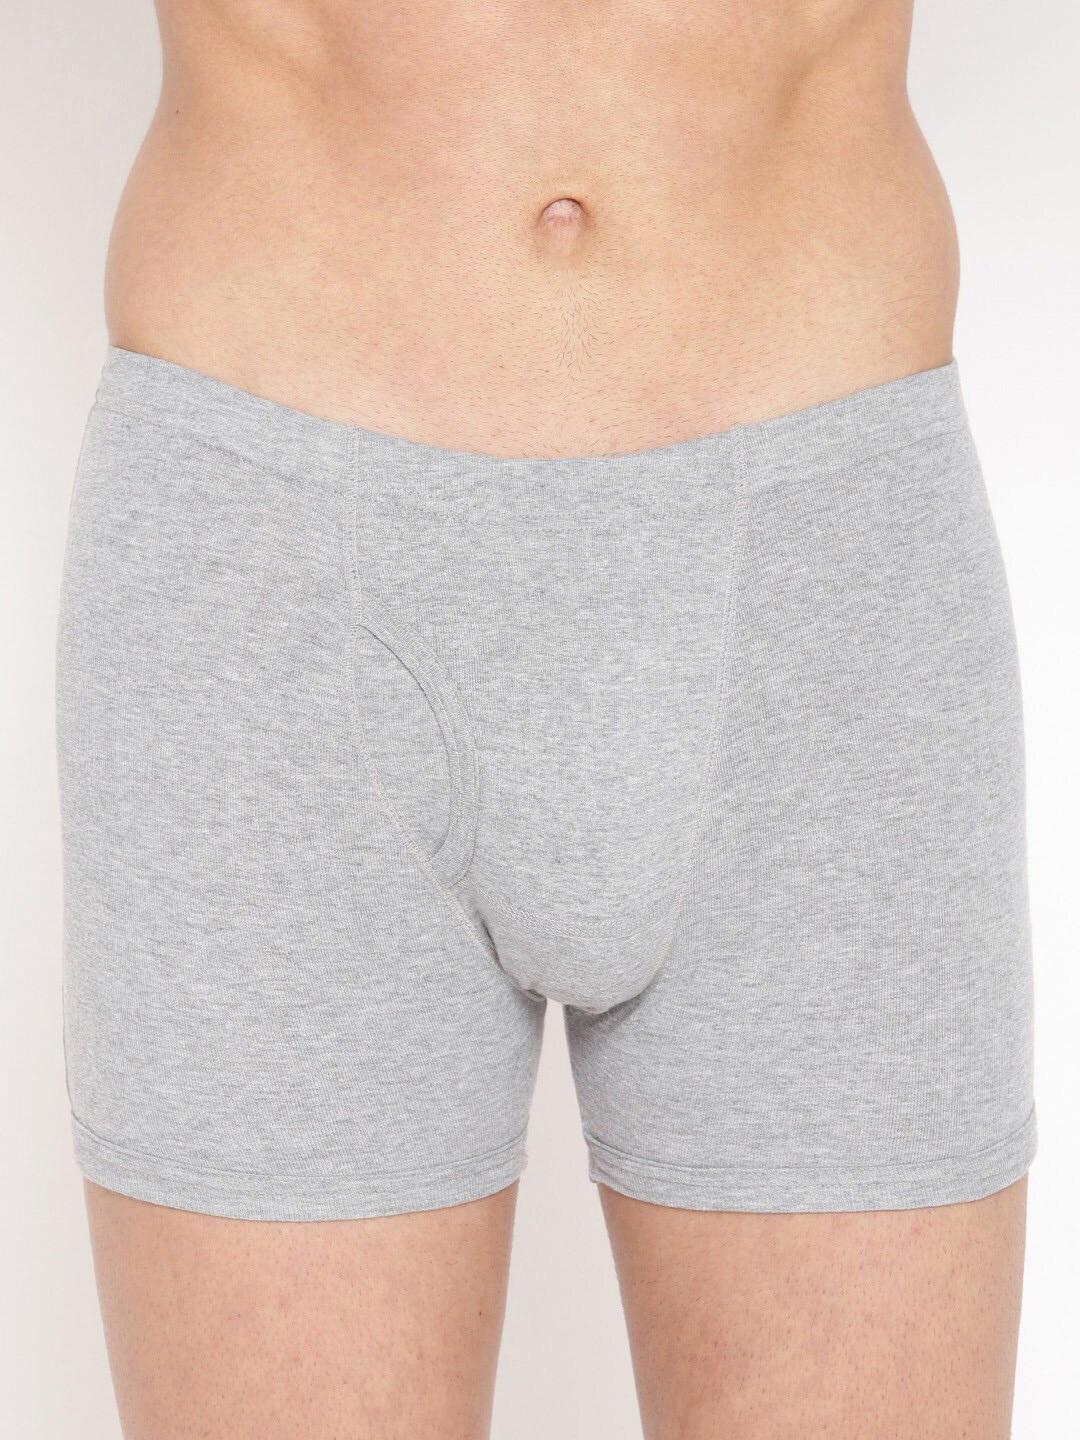 the roadster lifestyle co. grey mid rise breathable cotton trunk rtie-1004-gry-1